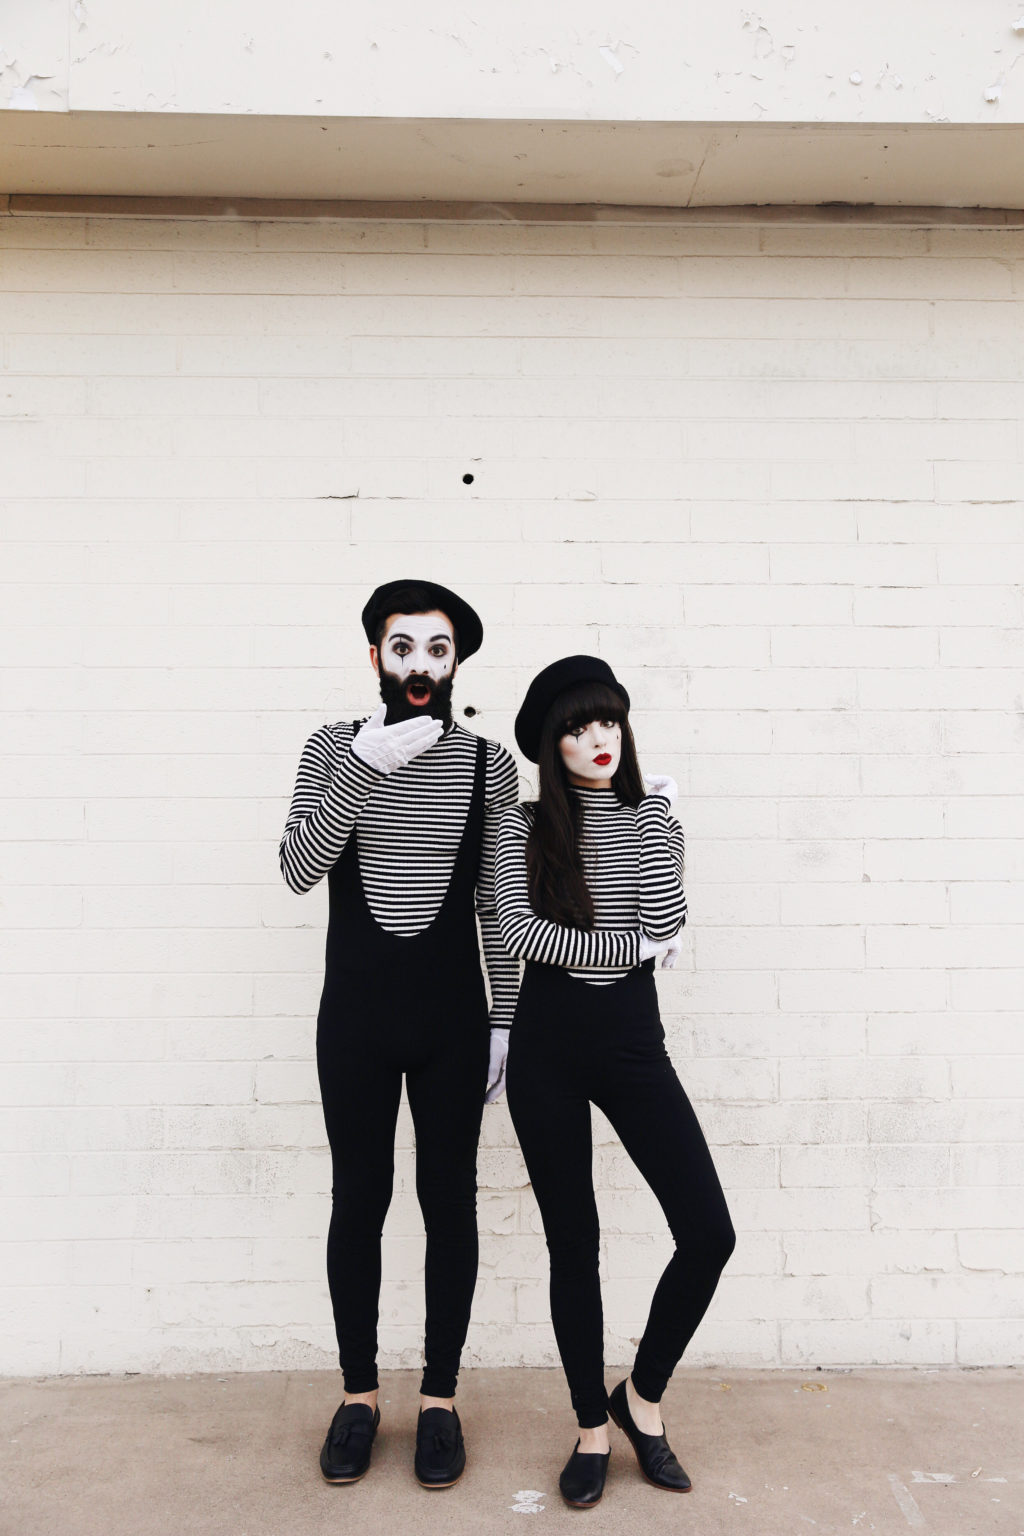 10 creative couples costumes to DIY for Halloween